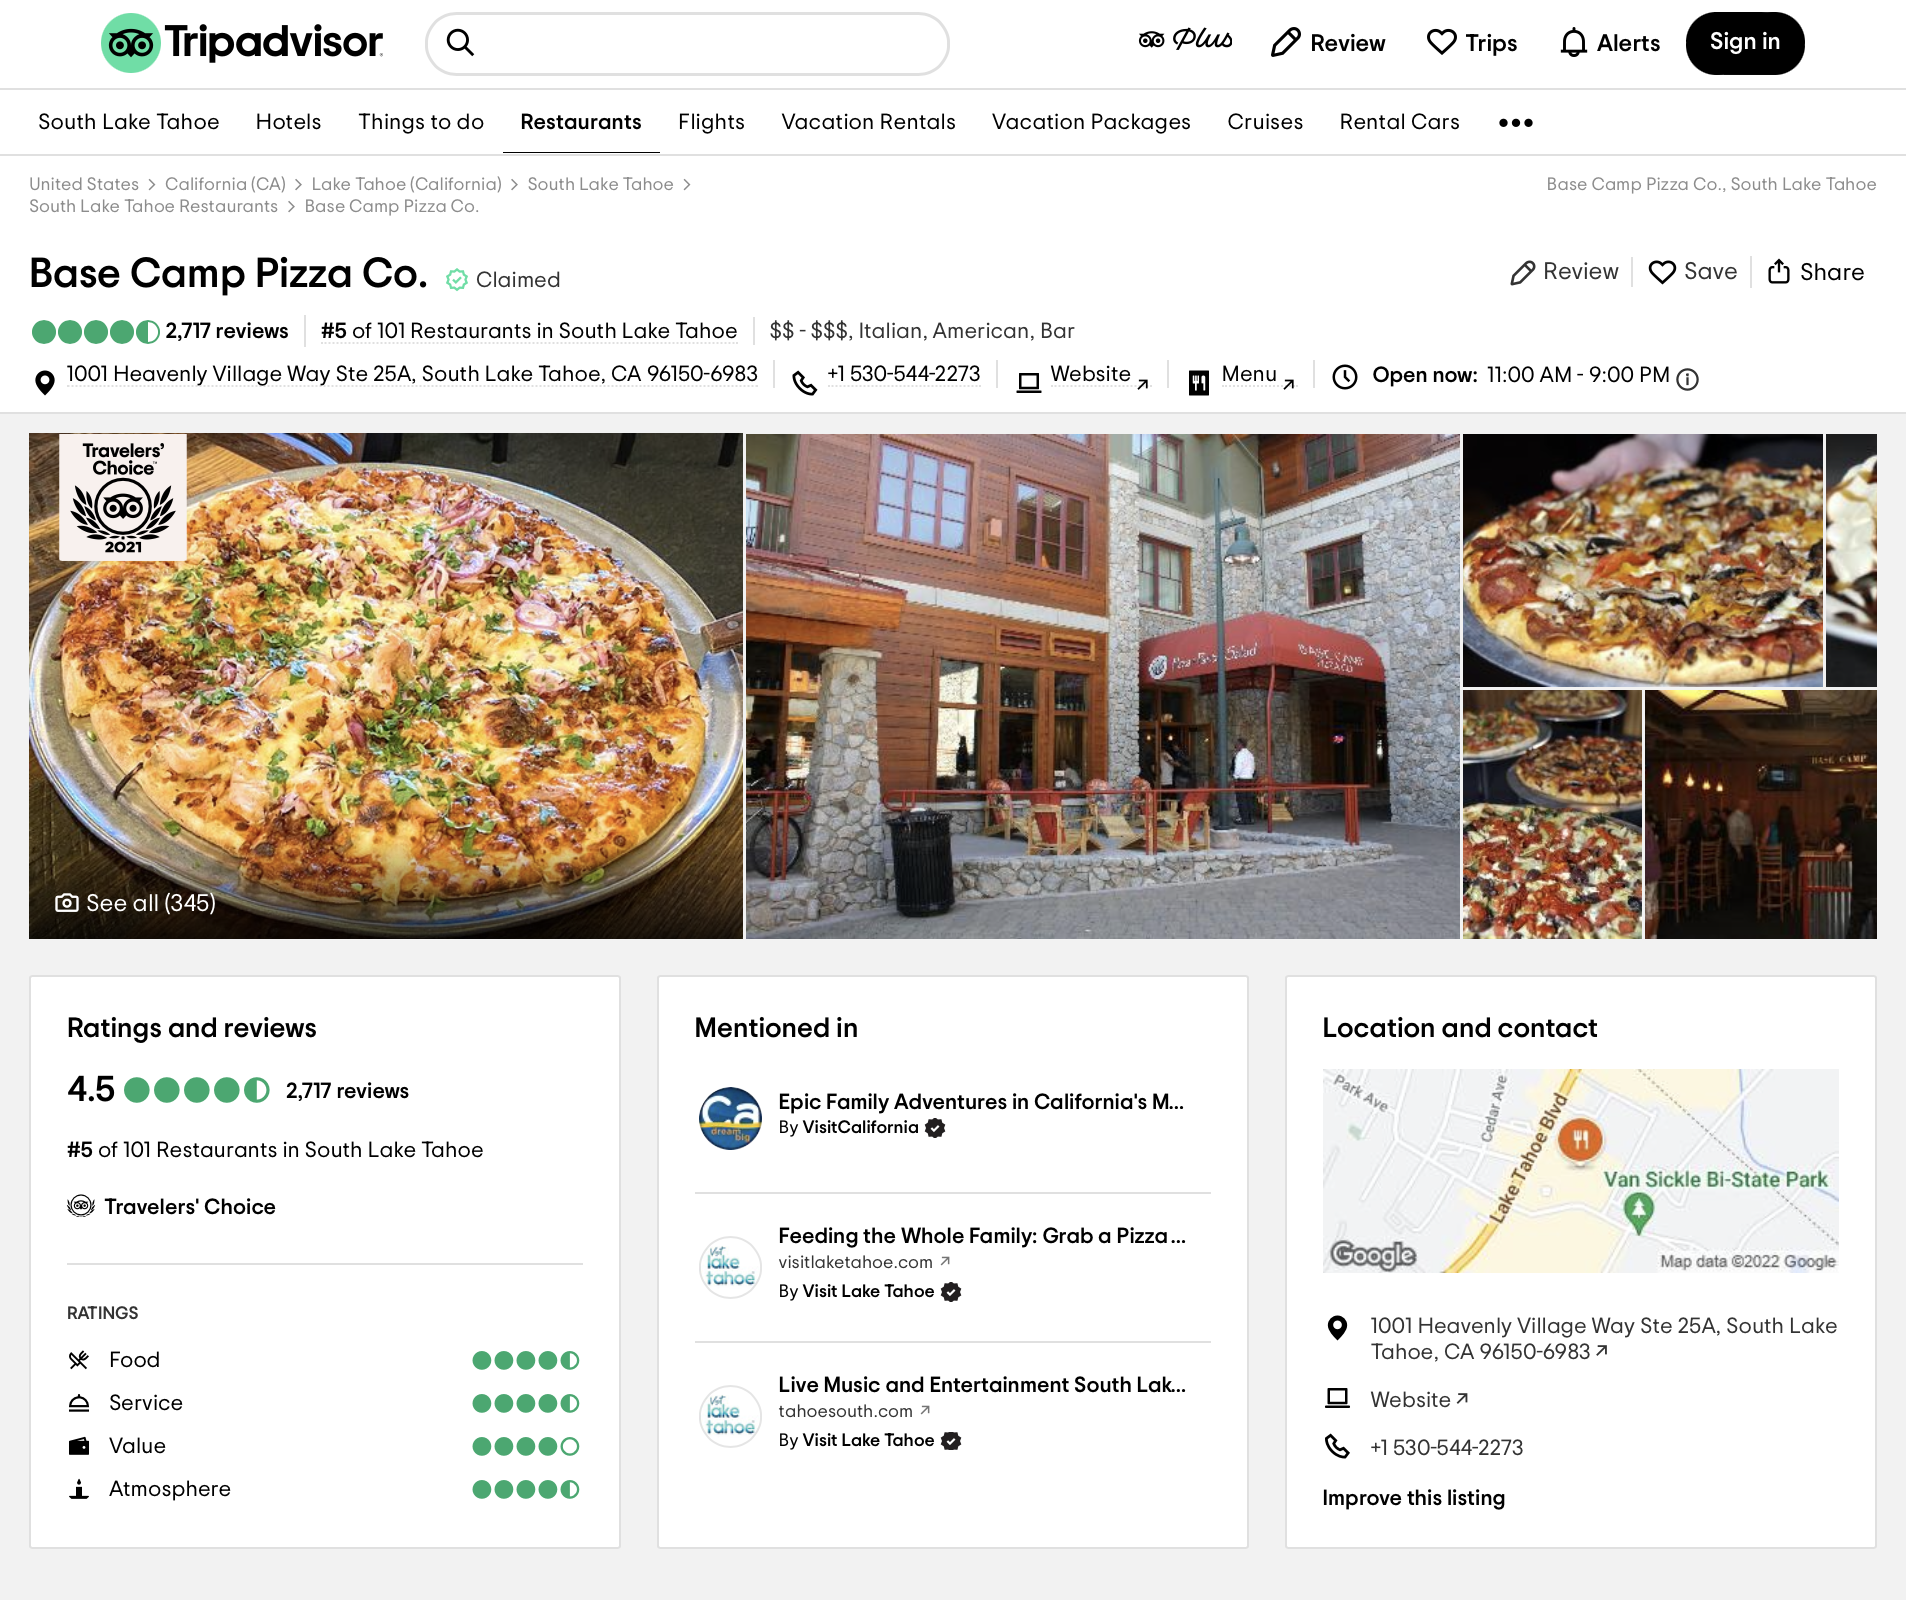 Base Camp Pizza Co. business hours, map, and other details on TripAdvisor business page.